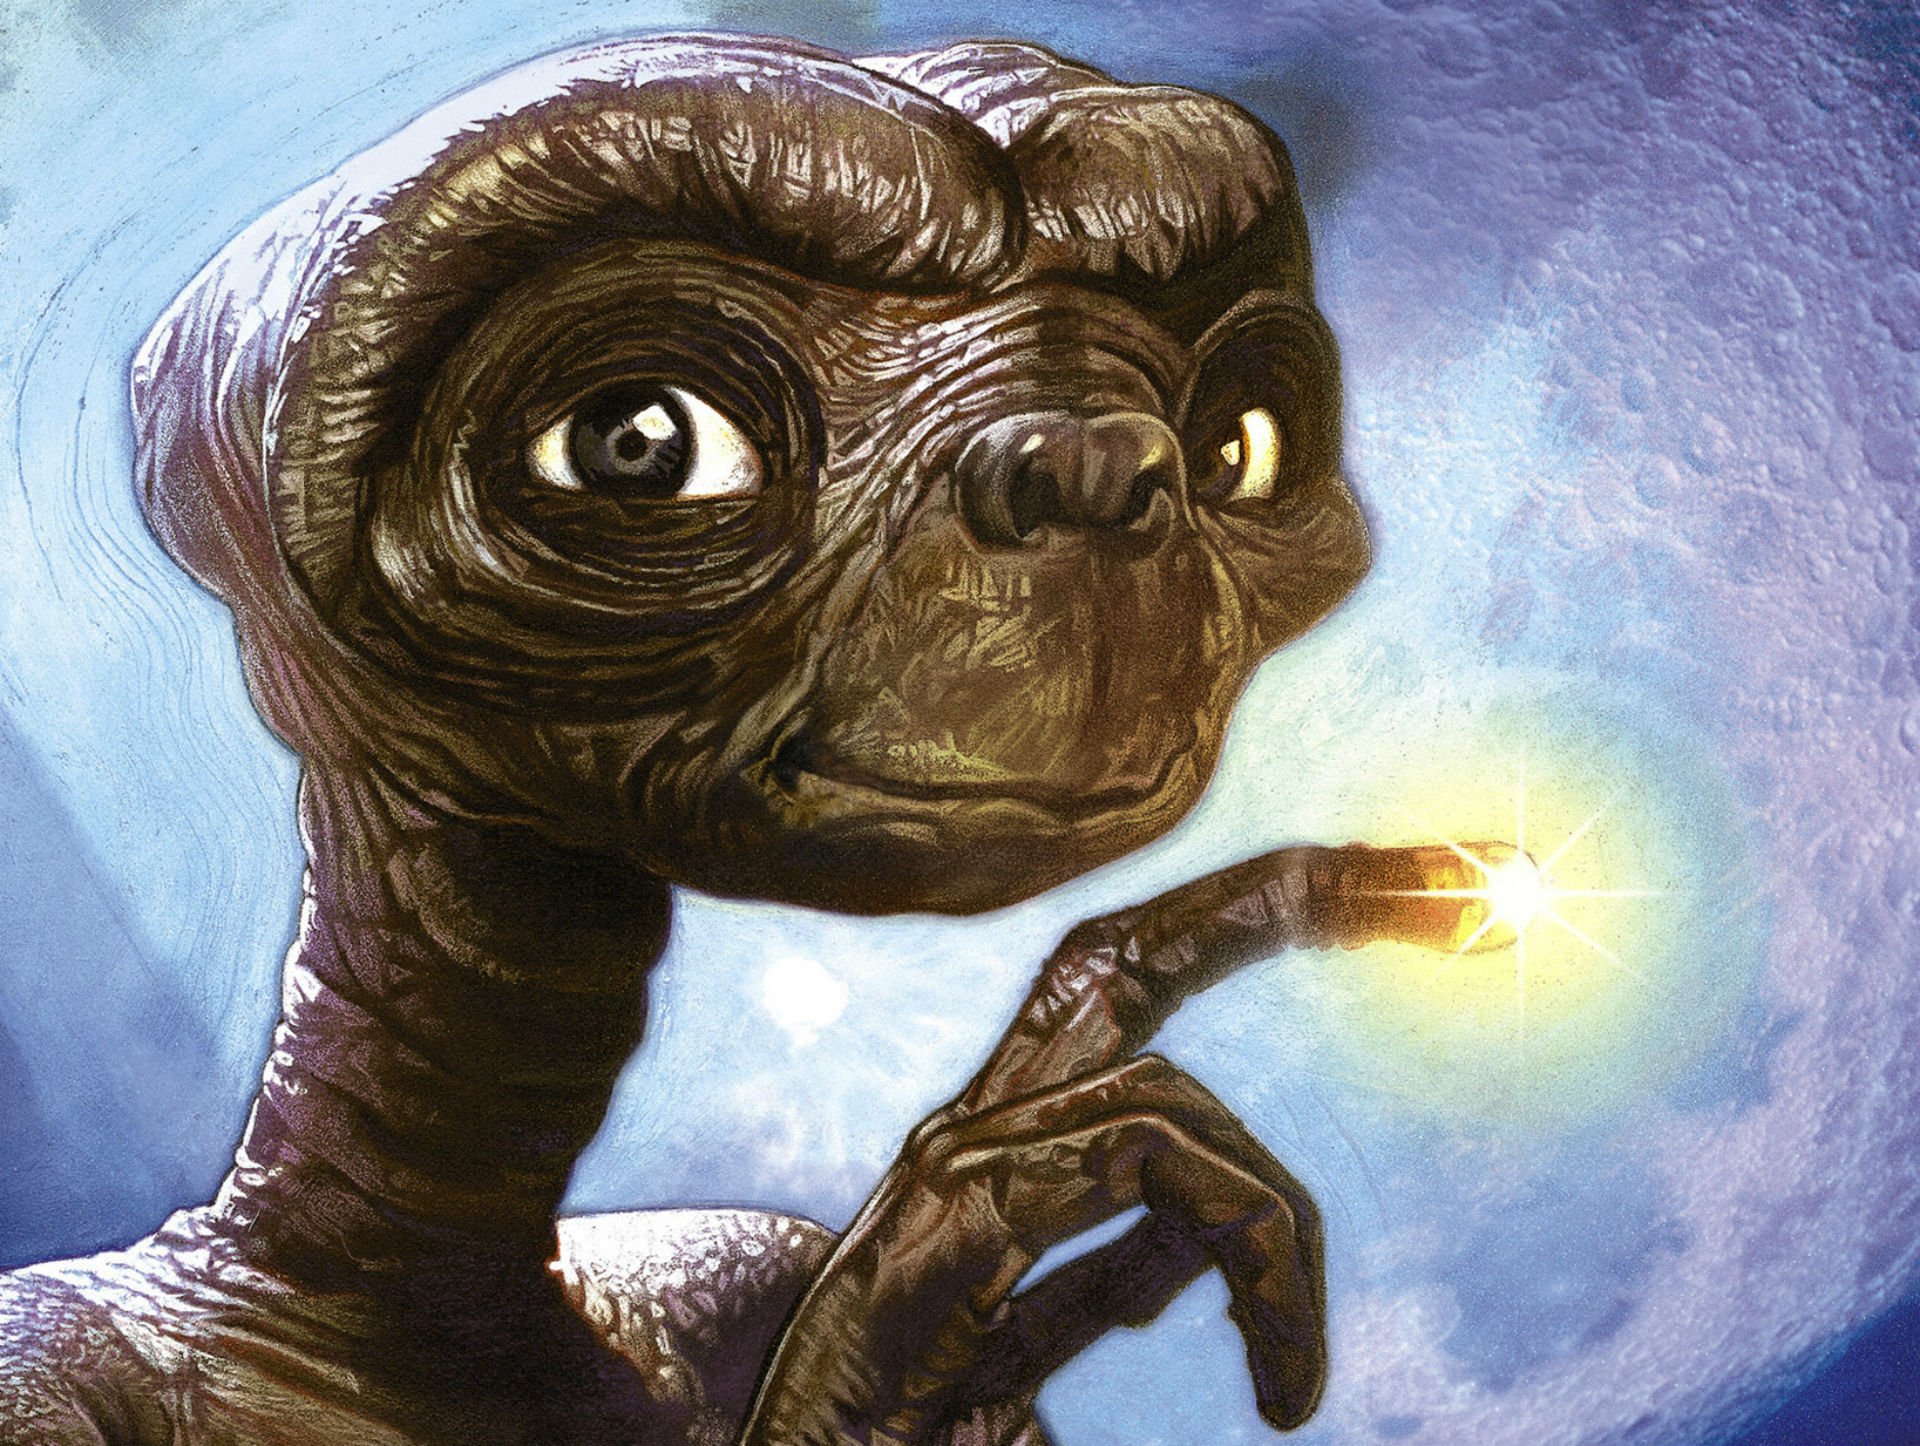 E.T. the Extra-Terrestrial - Movie info and showtimes in 